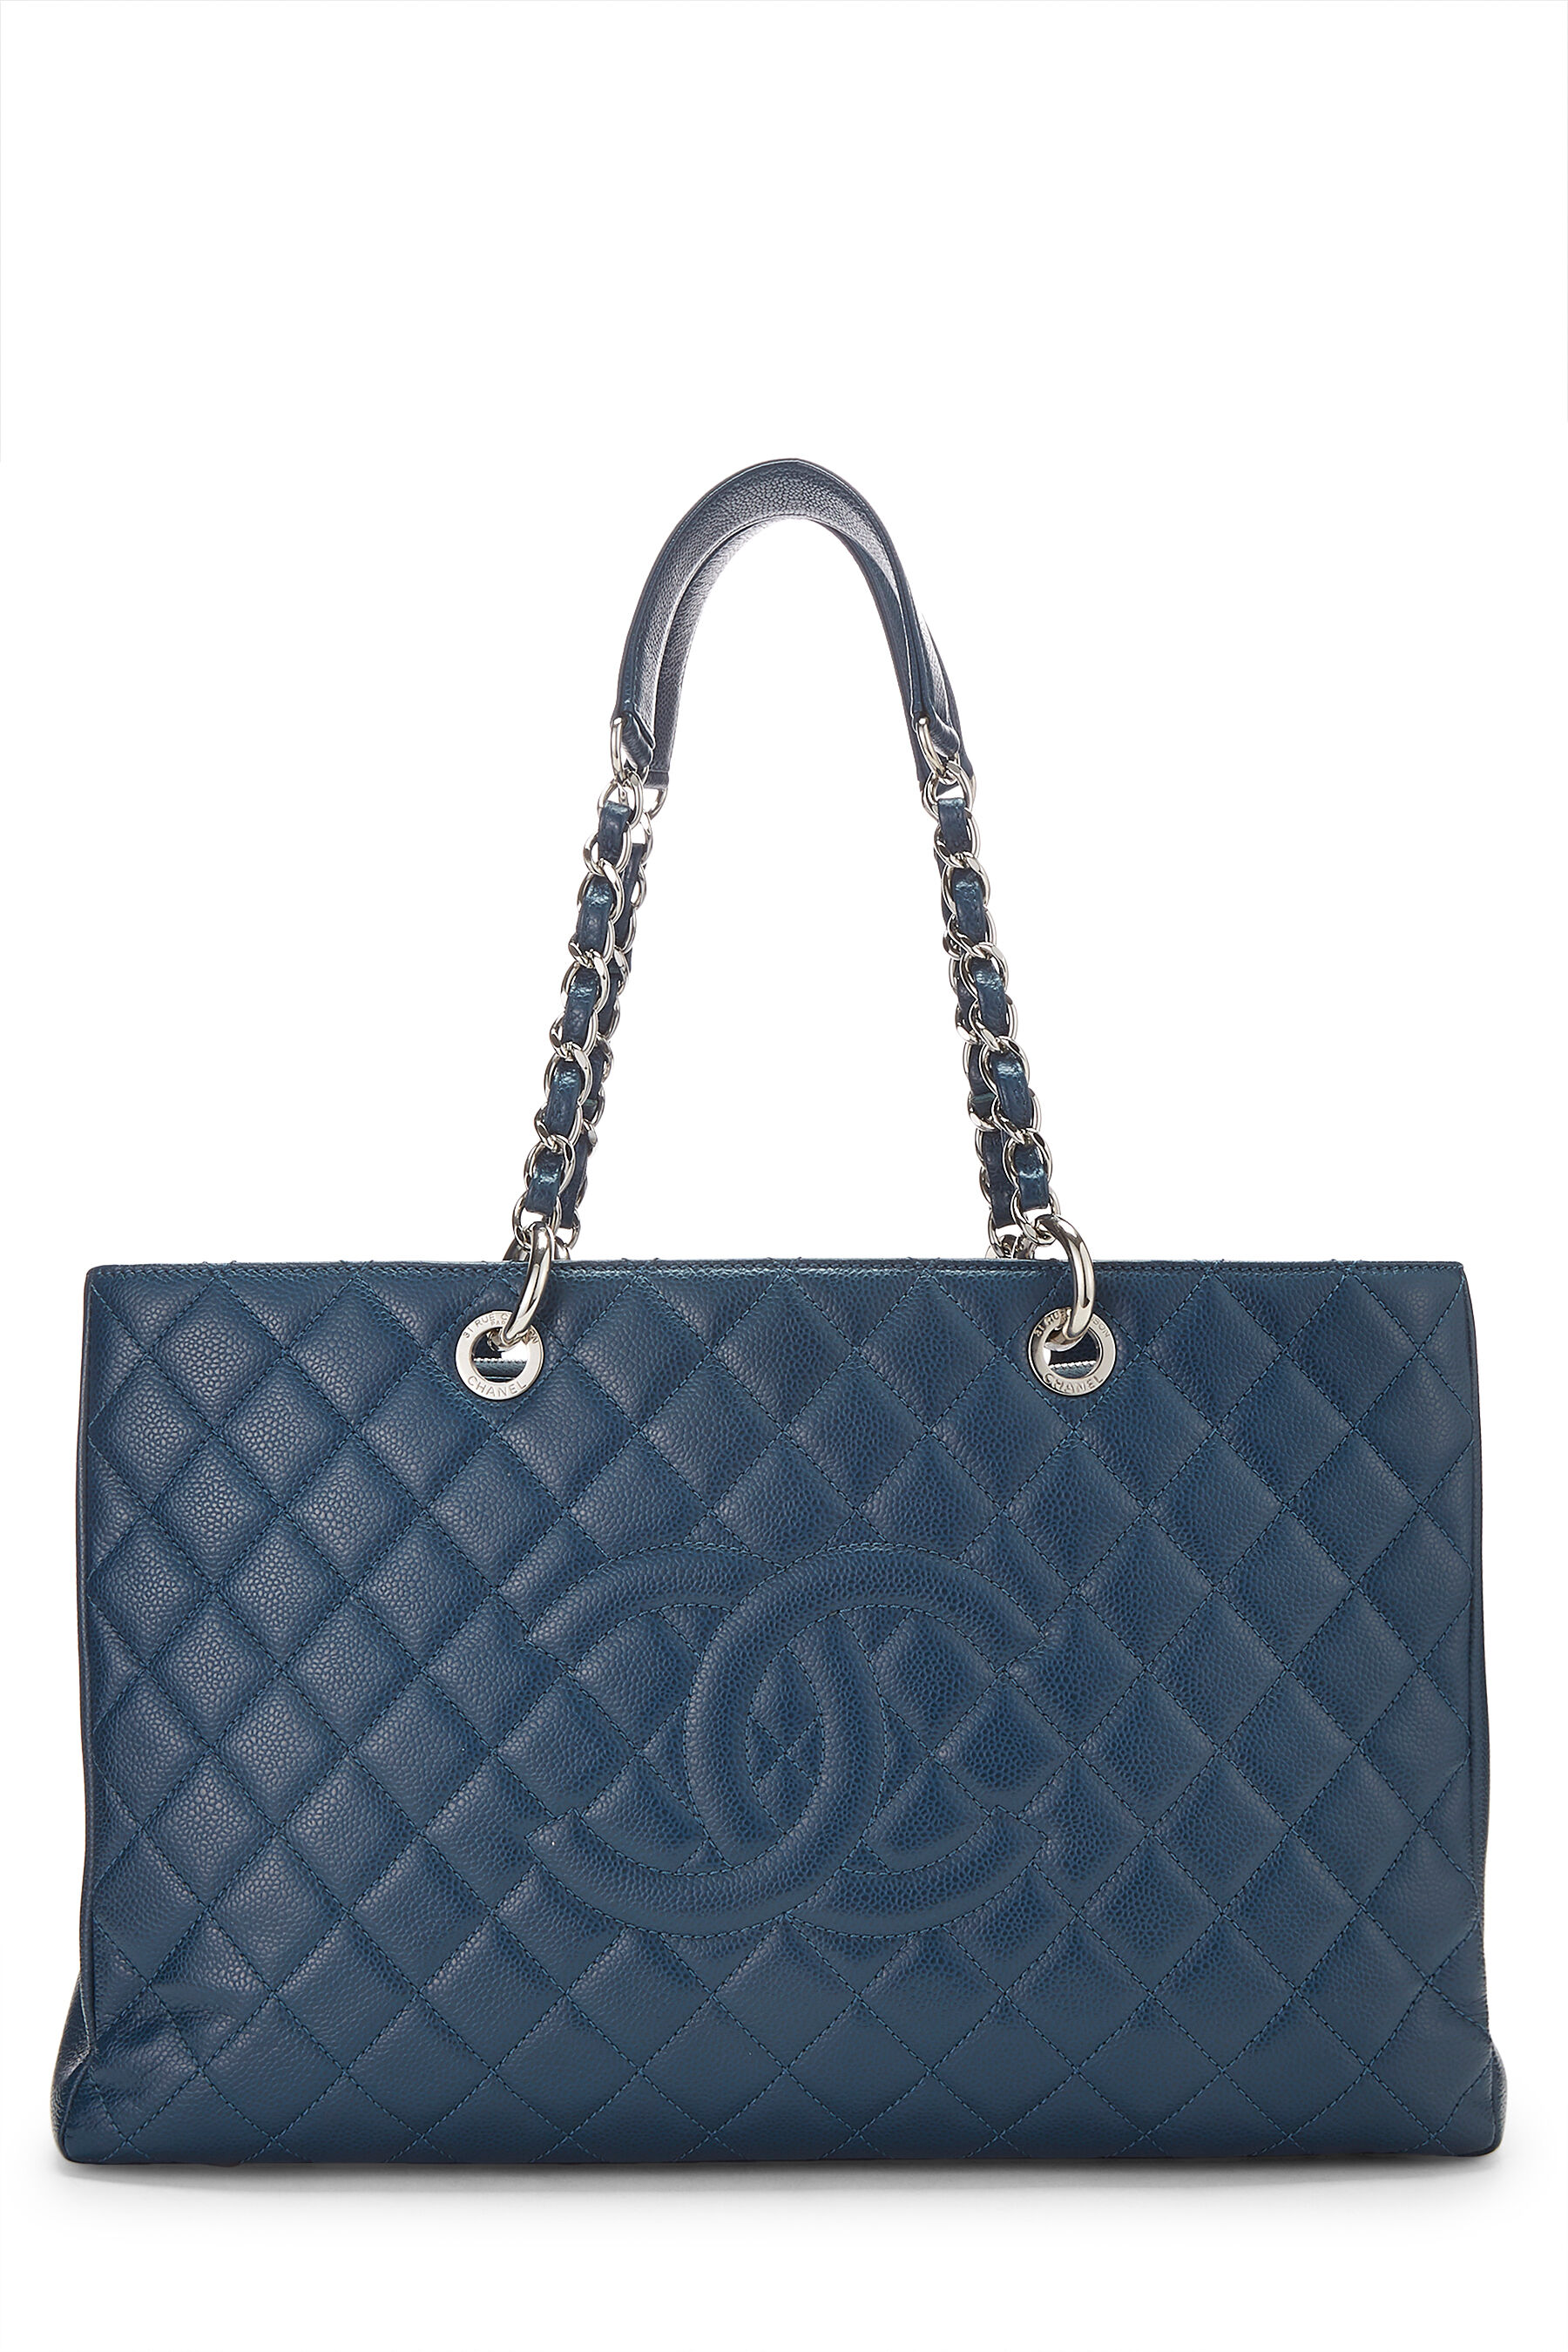 Chanel - Navy Quilted Caviar Grand Shopping Tote (GST) XL